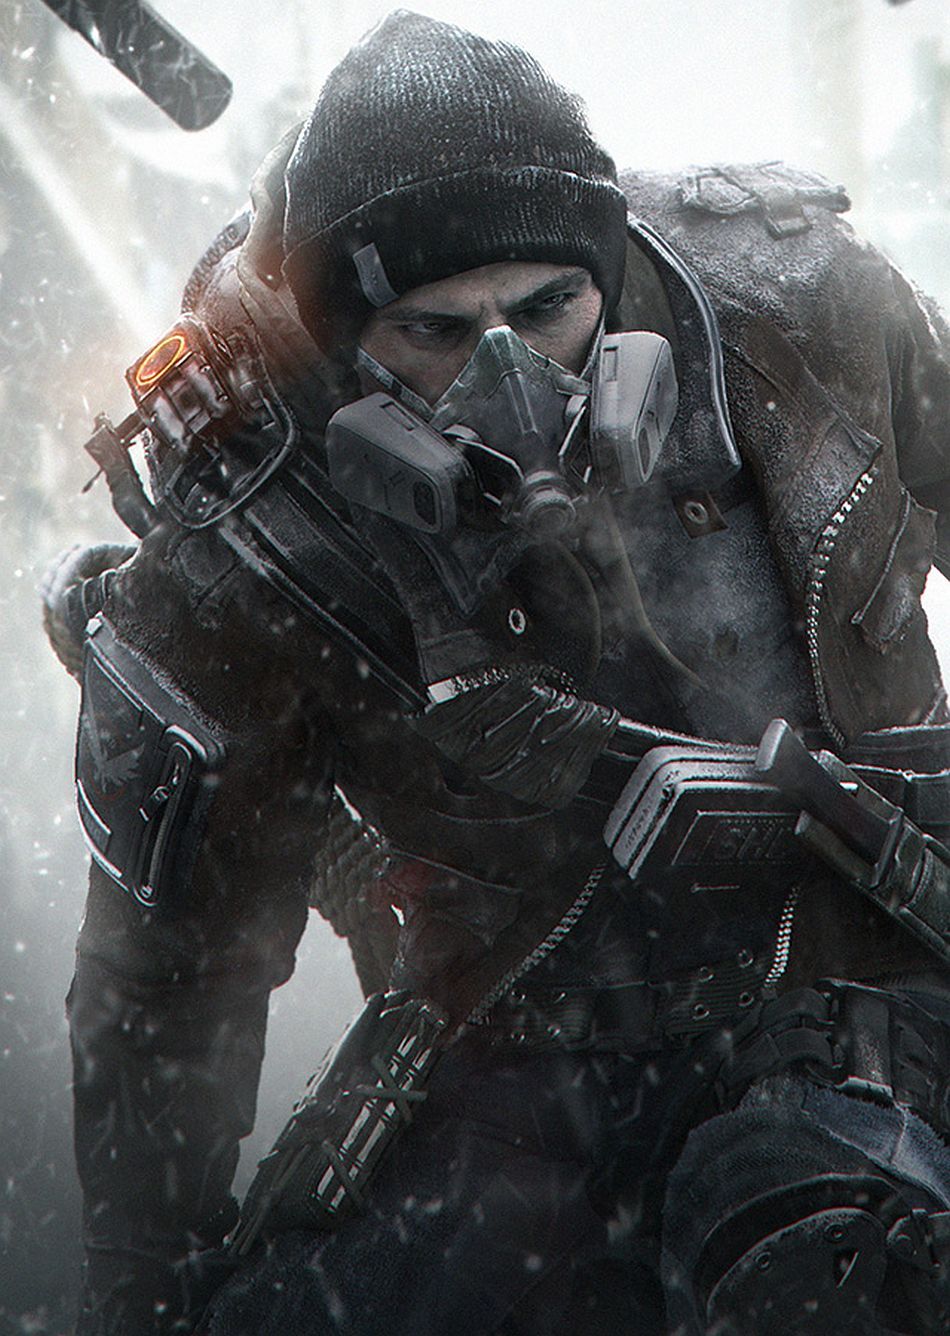 Image for The Division expansions Last Stand and Survival delayed to focus on game balancing and other improvements